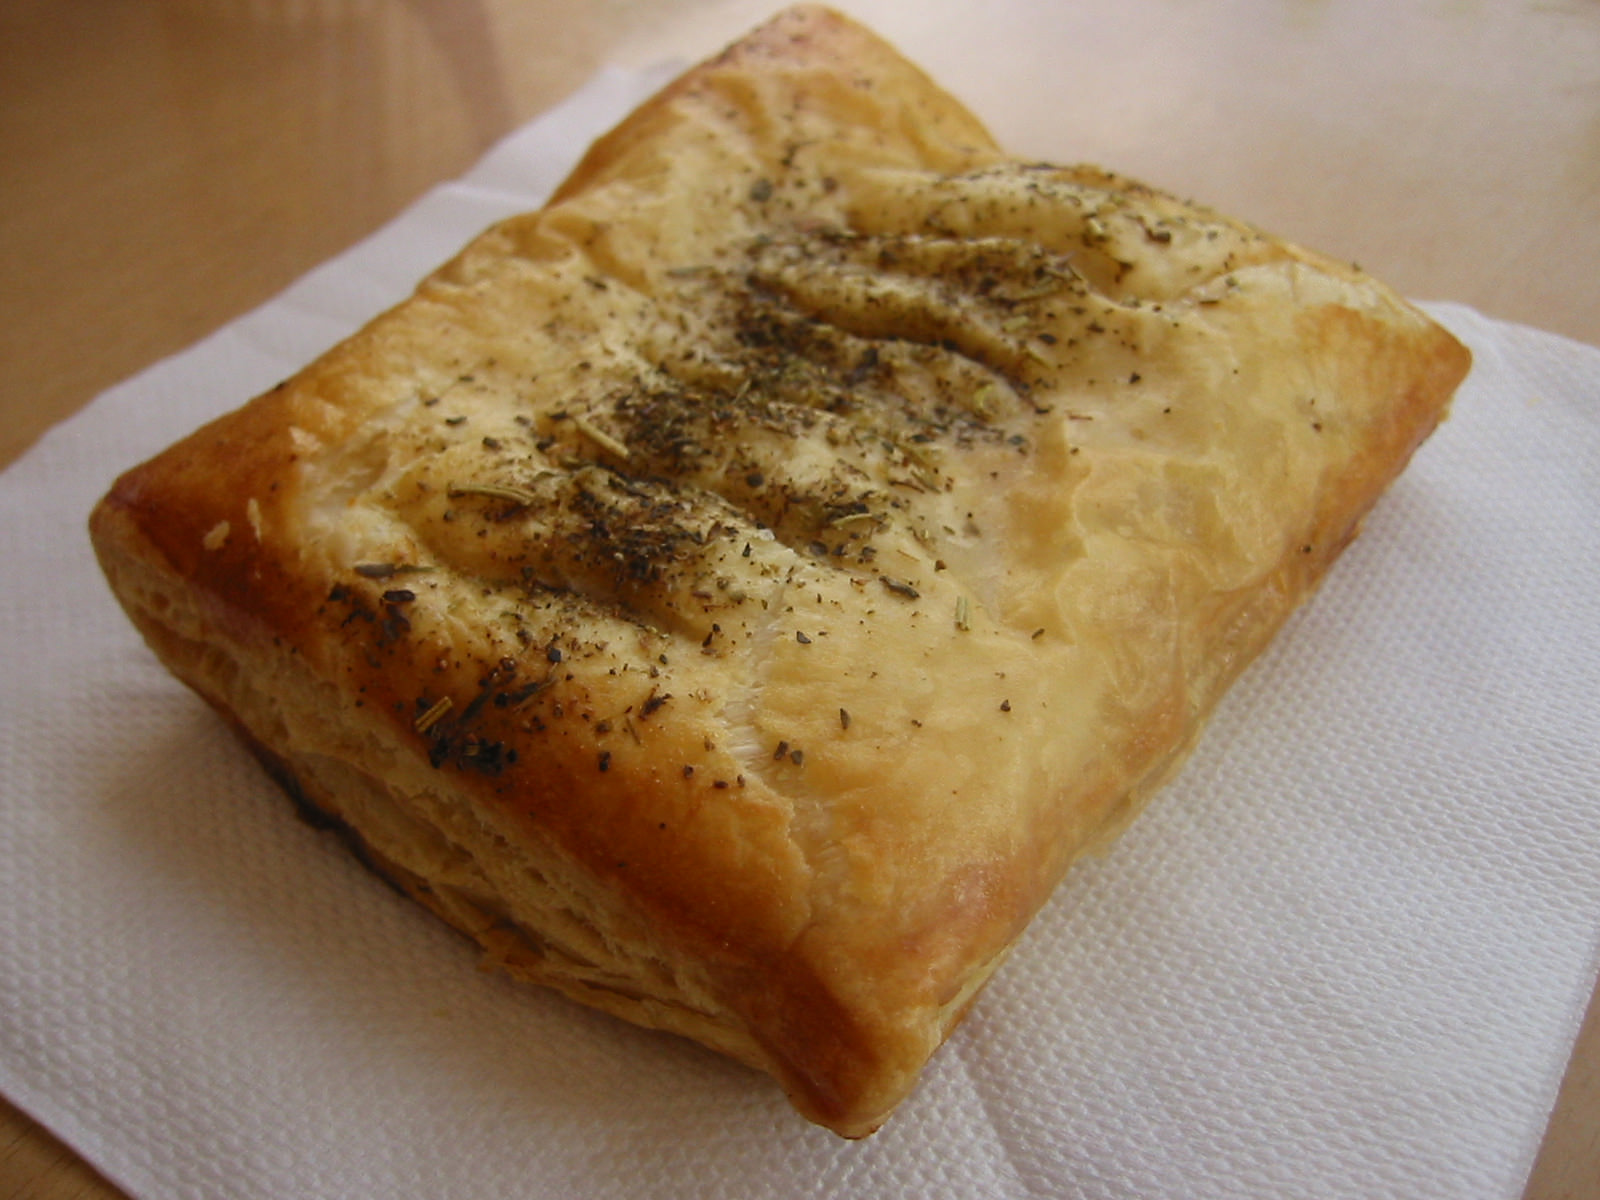 VR's spinach and ricotta pastry